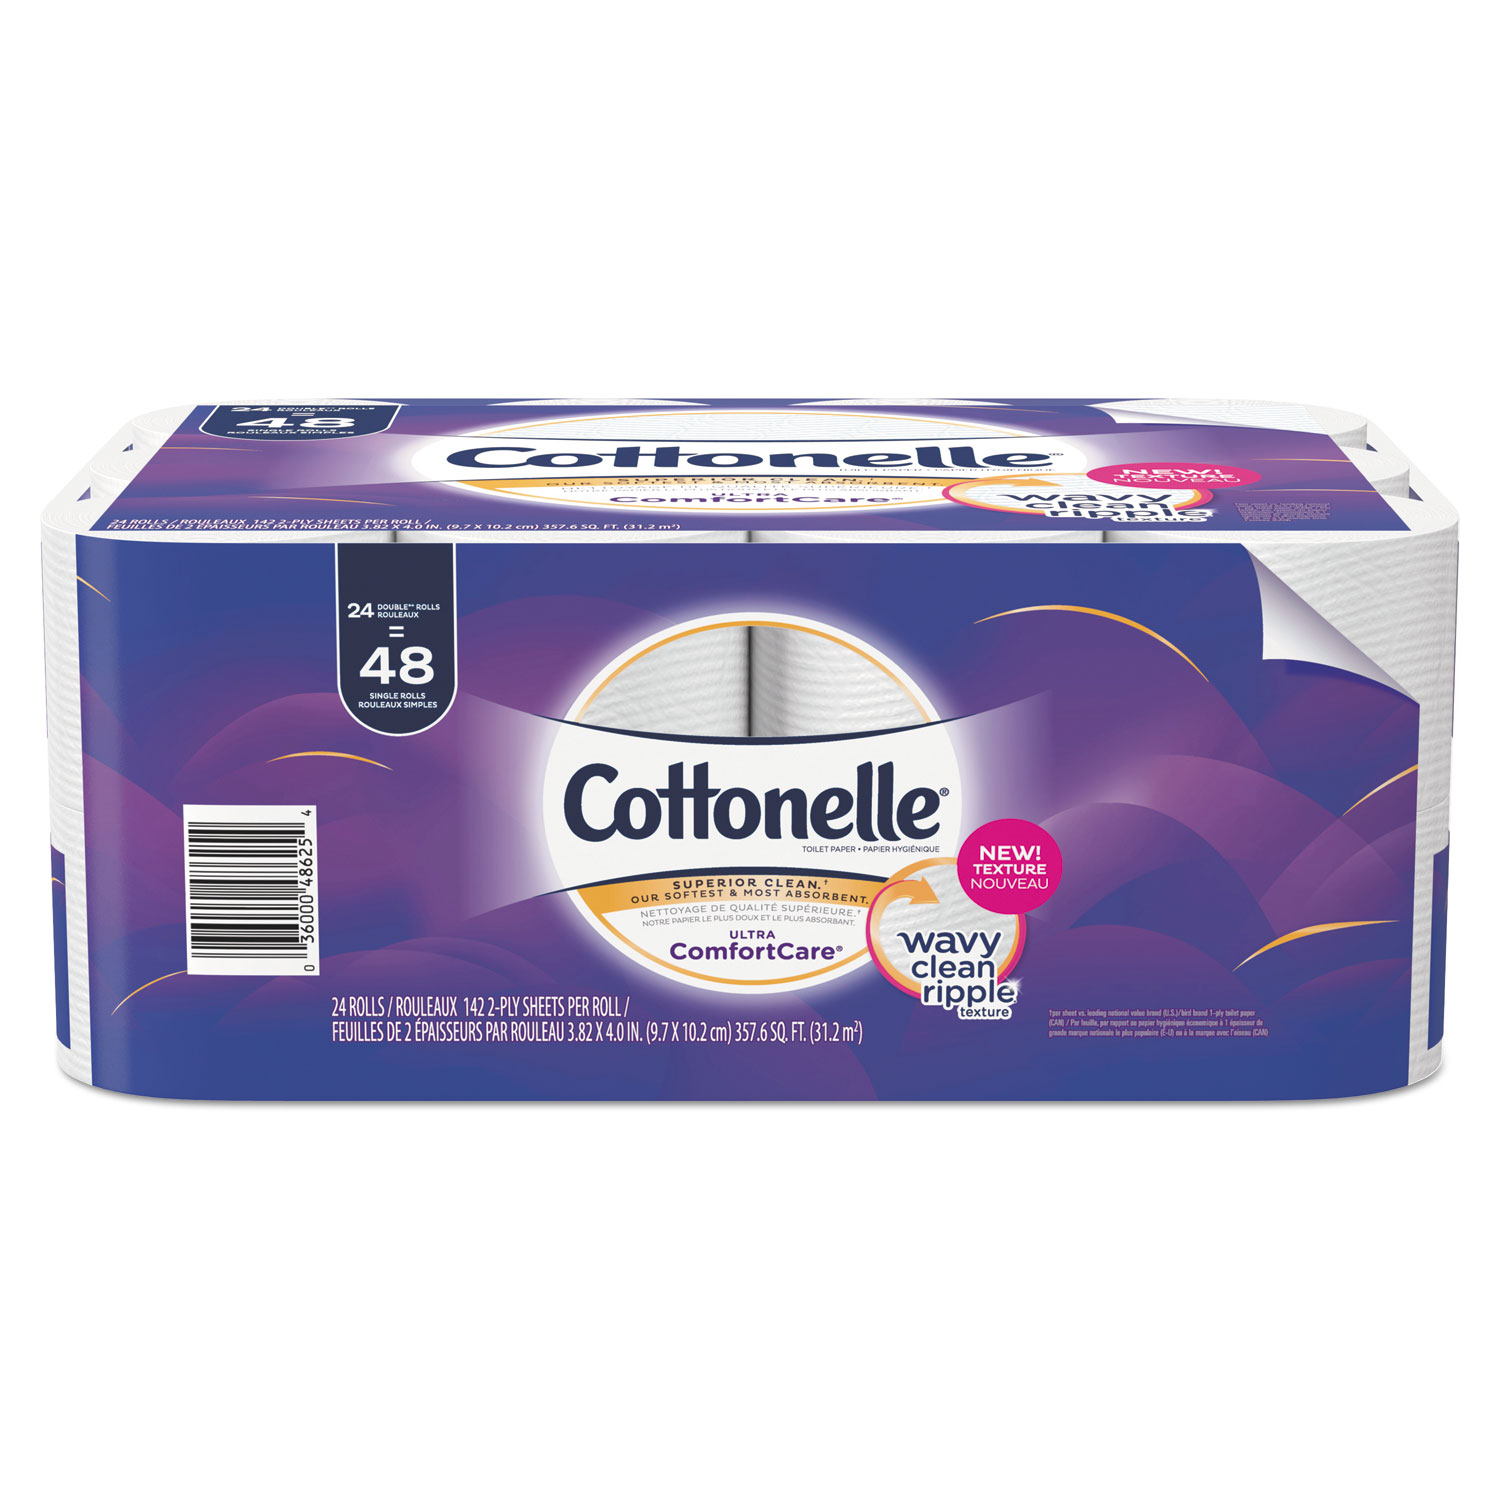  Cottonelle 48625 Ultra ComfortCare Toilet Paper, Soft Tissue, Septic Safe, 2 Ply, 142/Roll, 24 Rolls/Pack, 2 Packs/Carton (KCC48625) 